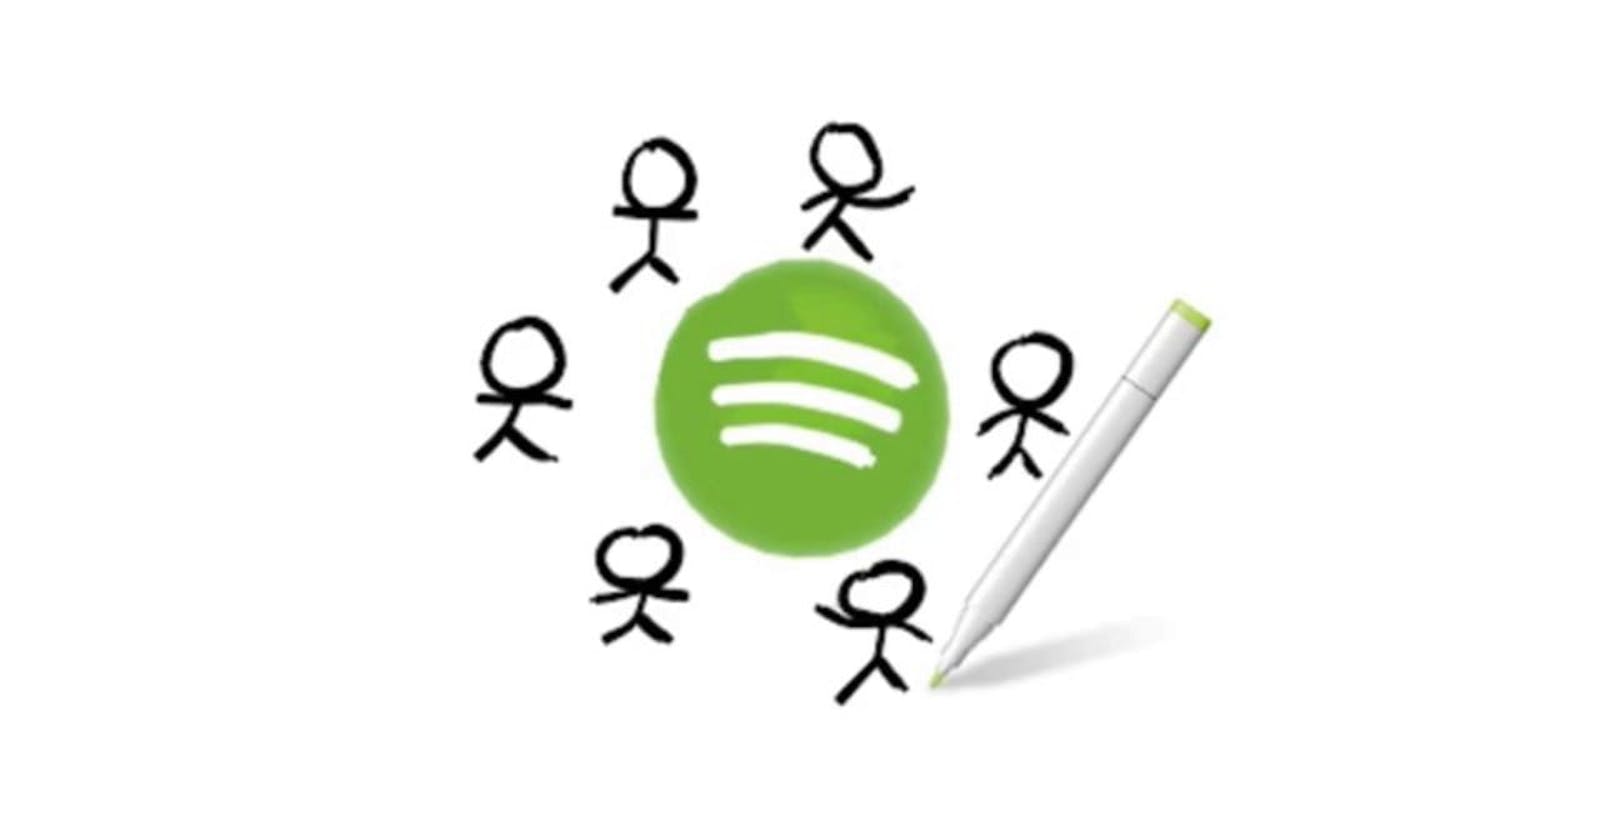 Spotify Engineering Culture - part 1